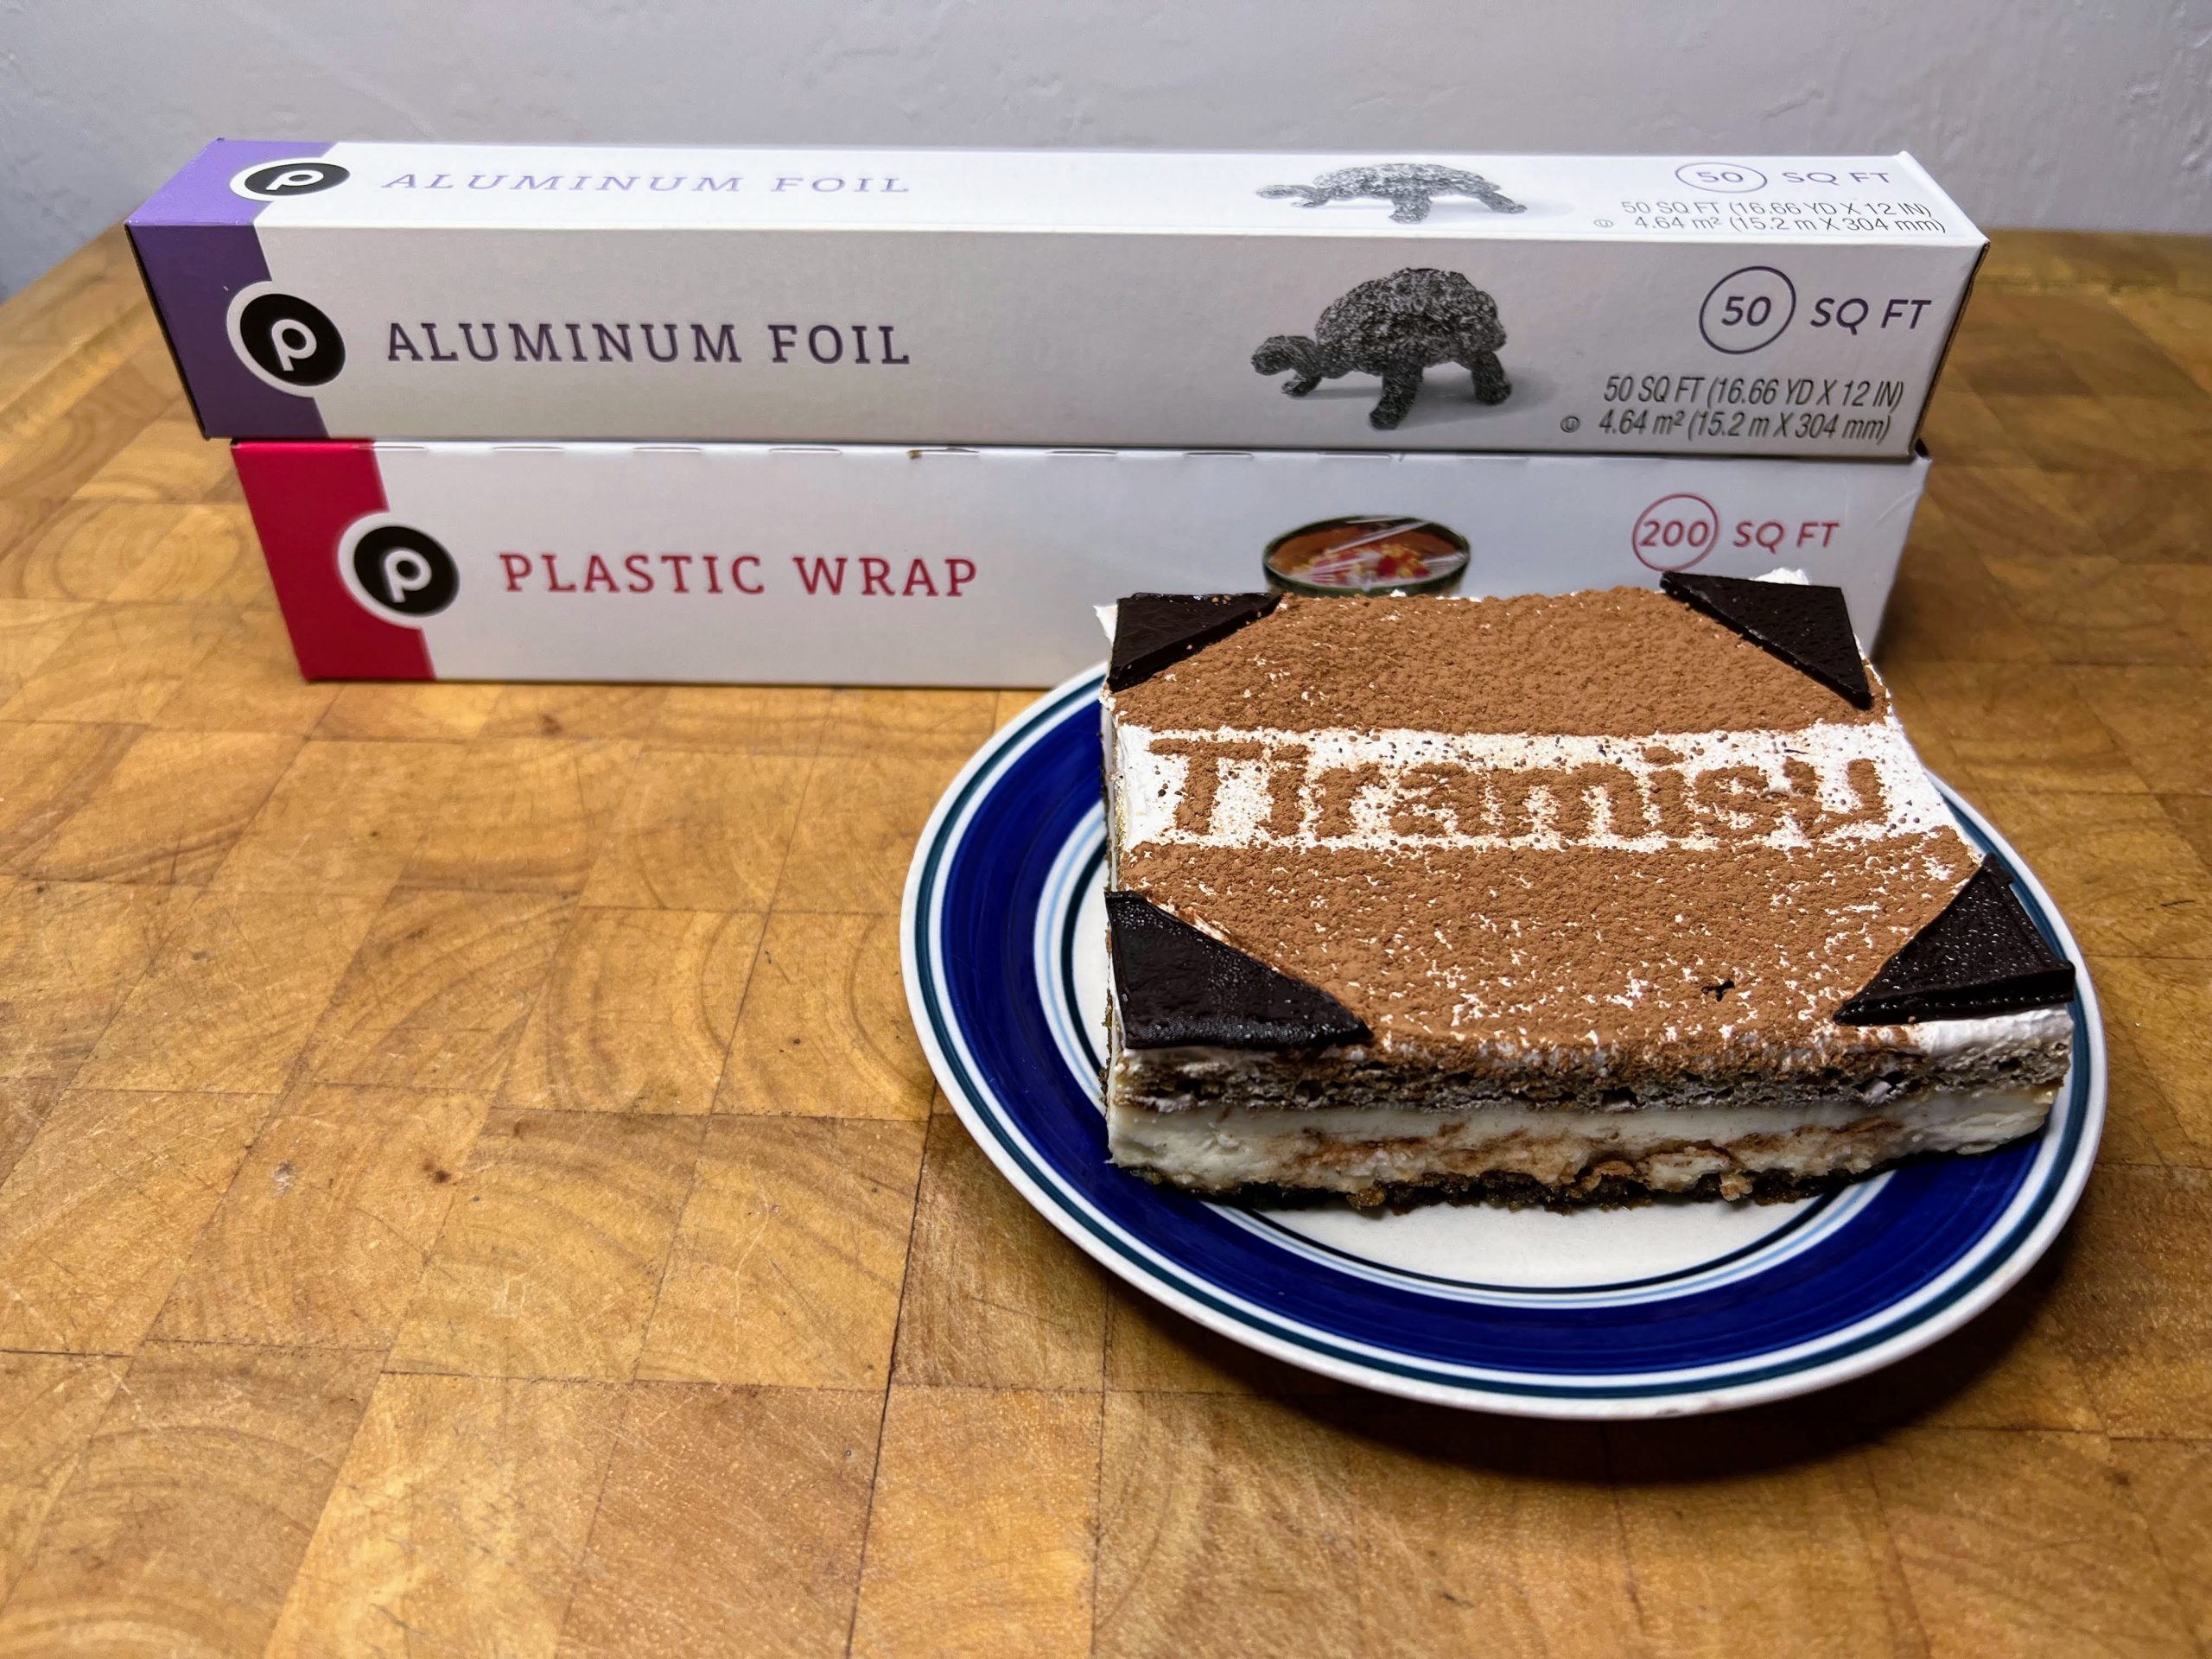 slice of tiramisu on blue and white plate with plastic wrap and aluminum foil next to it